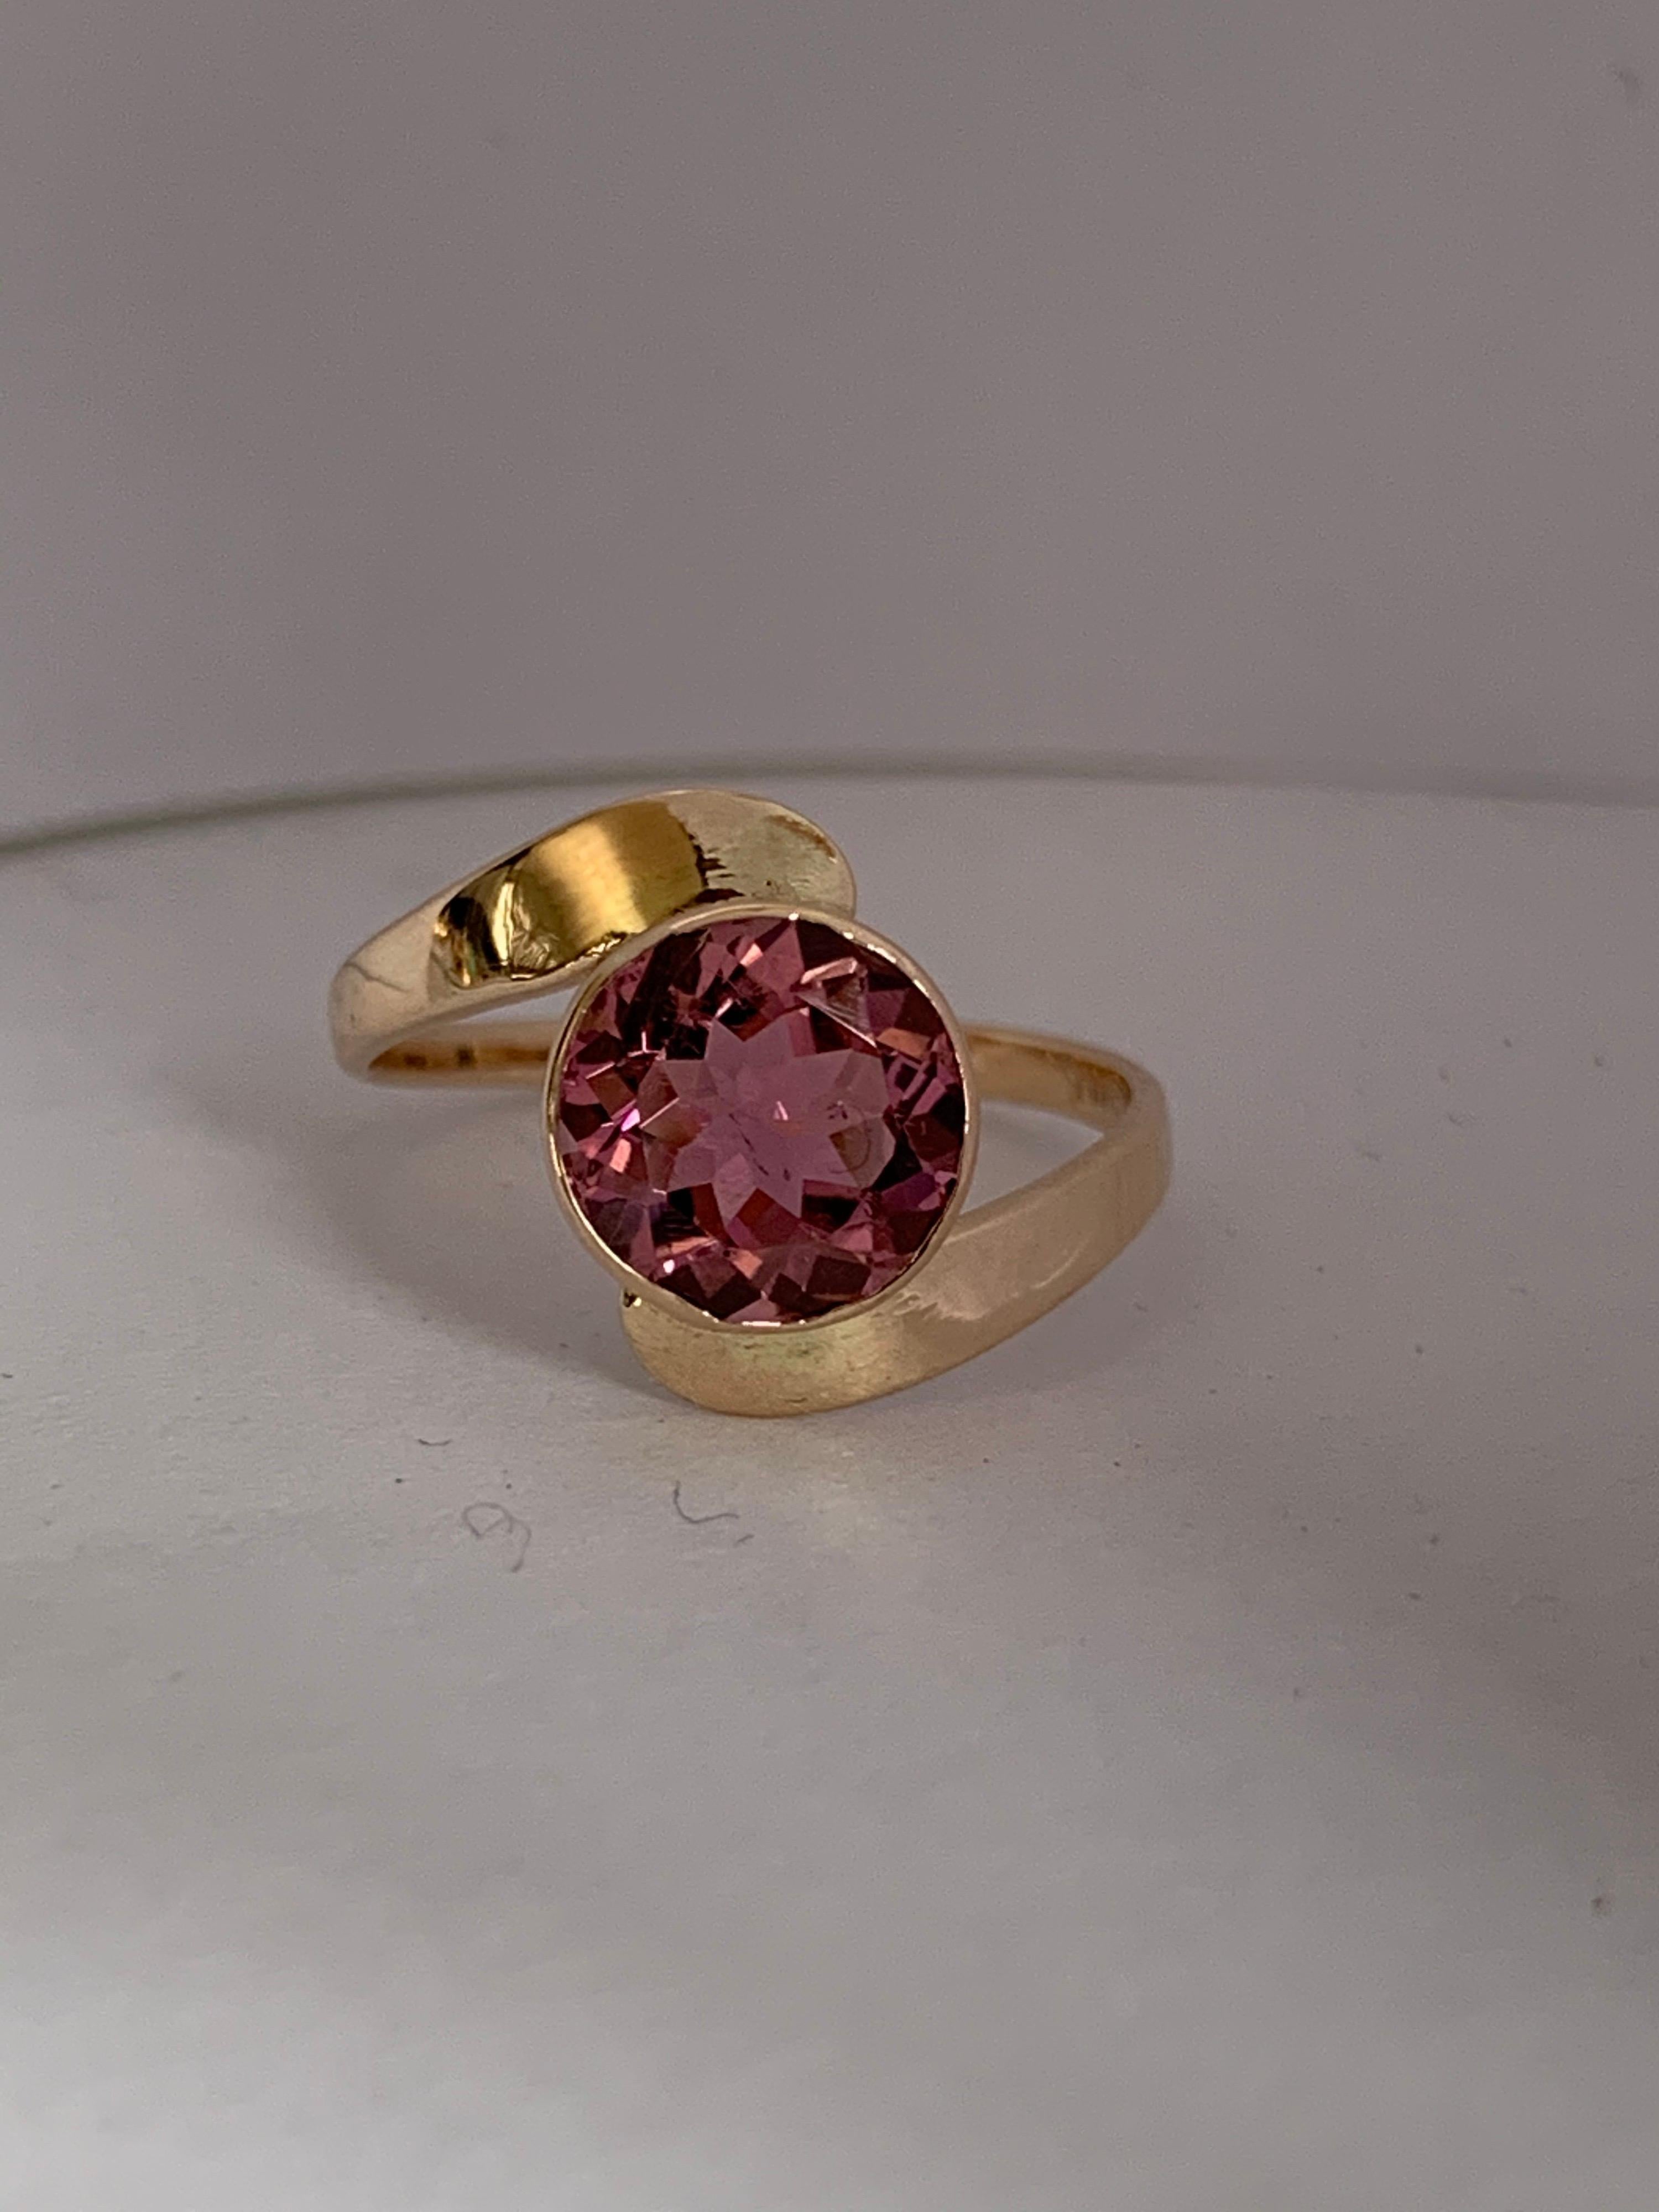 Round pink Tourmaline set in 14 Karat yellow gold is handcrafted one of a kind ring. The stone is approximately 1.25 Carat with no inclusion. The ring is size 5 and can be resized if needed.